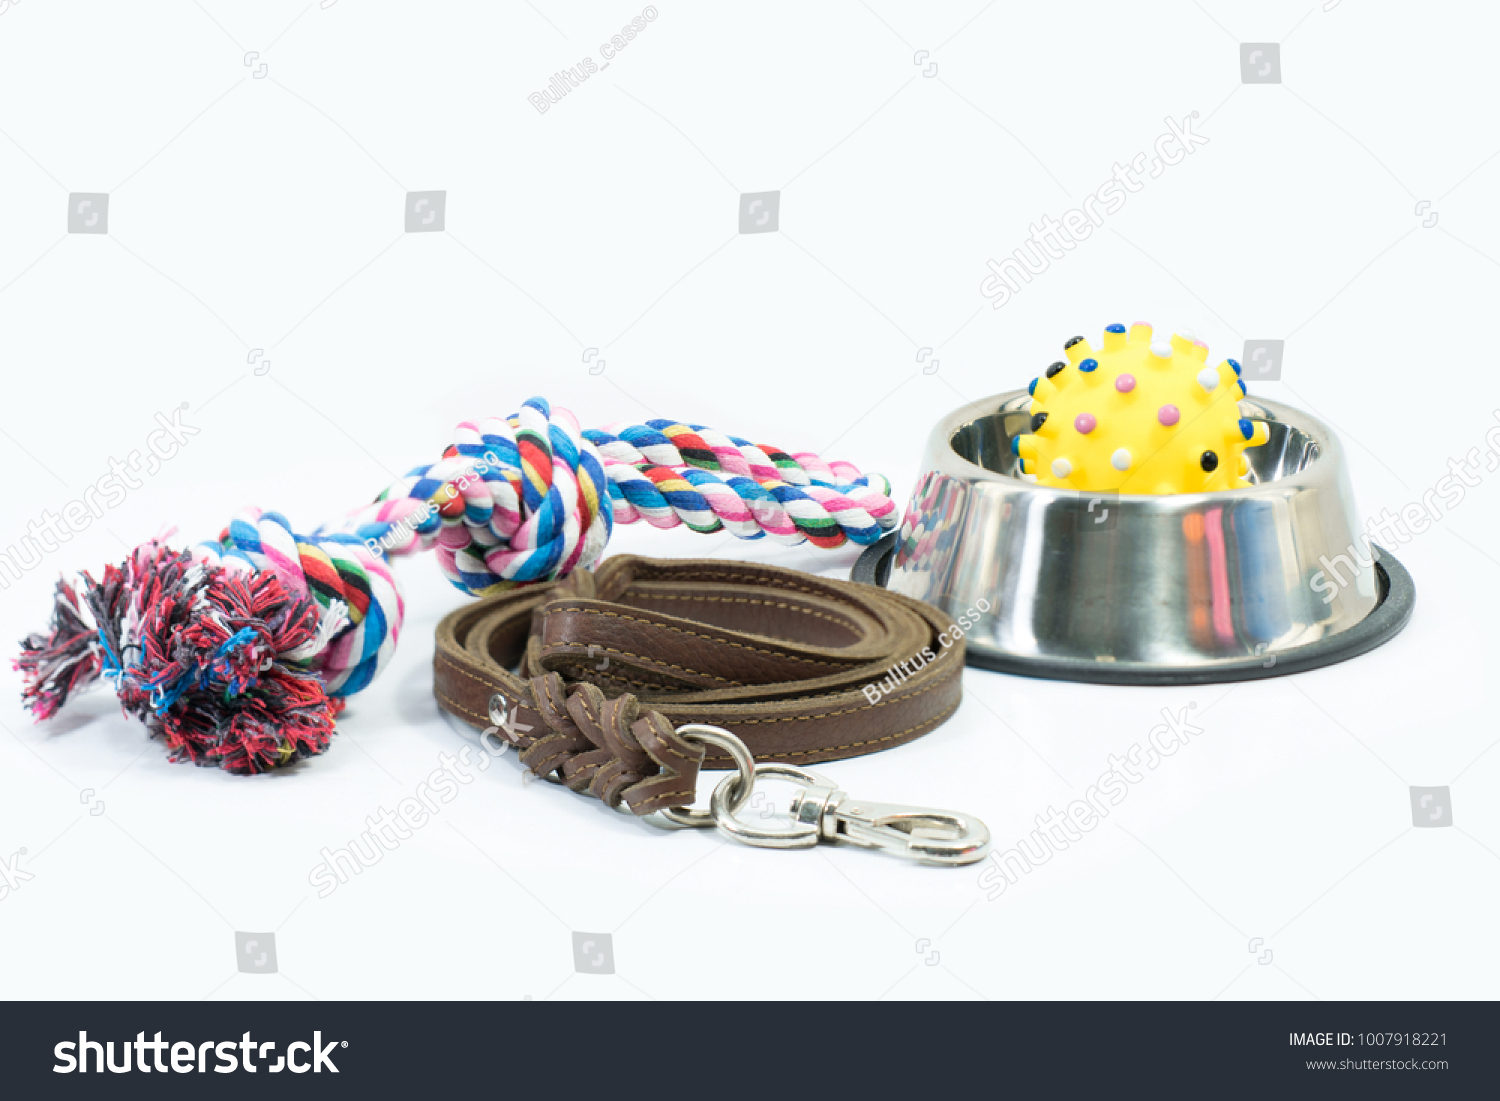 Pet supplies set about stainless bowl, rope, rubber toys and leather of leash for dog or cat on white background #1007918221